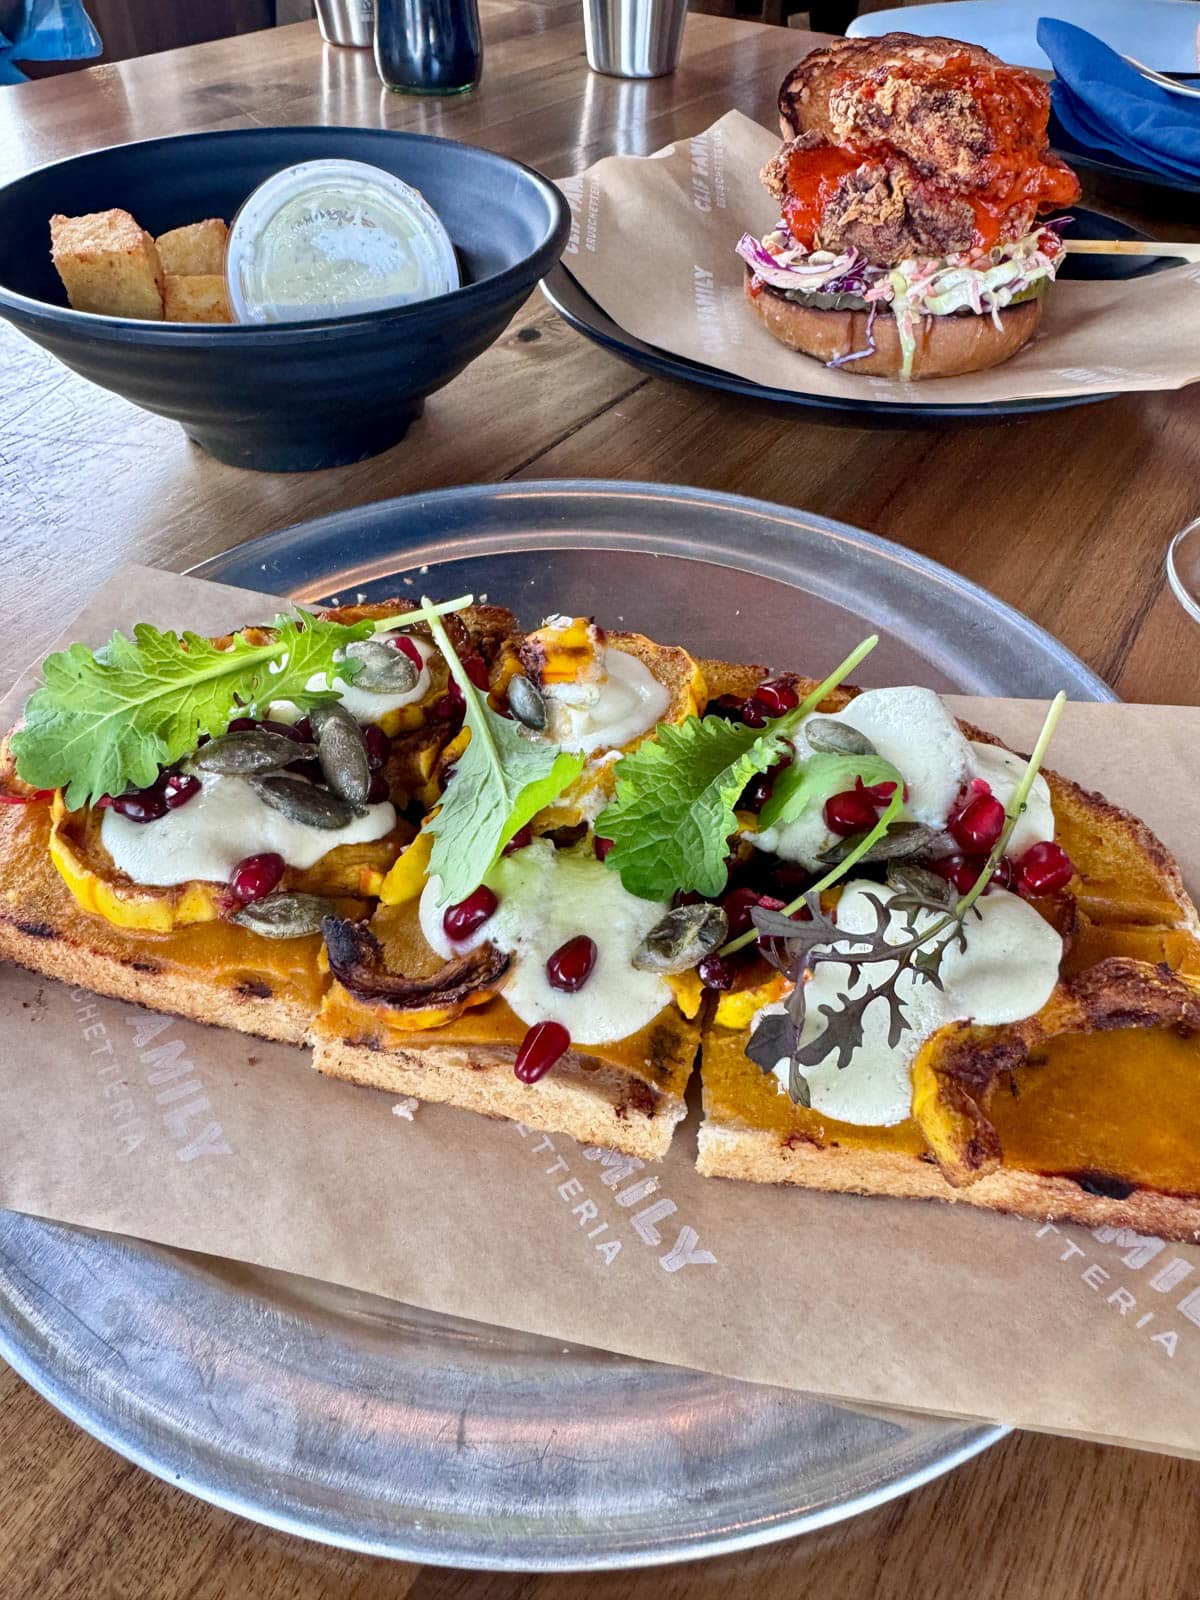 Squash flatbread with cheese in front of a fried chicken sandwich and other dish.